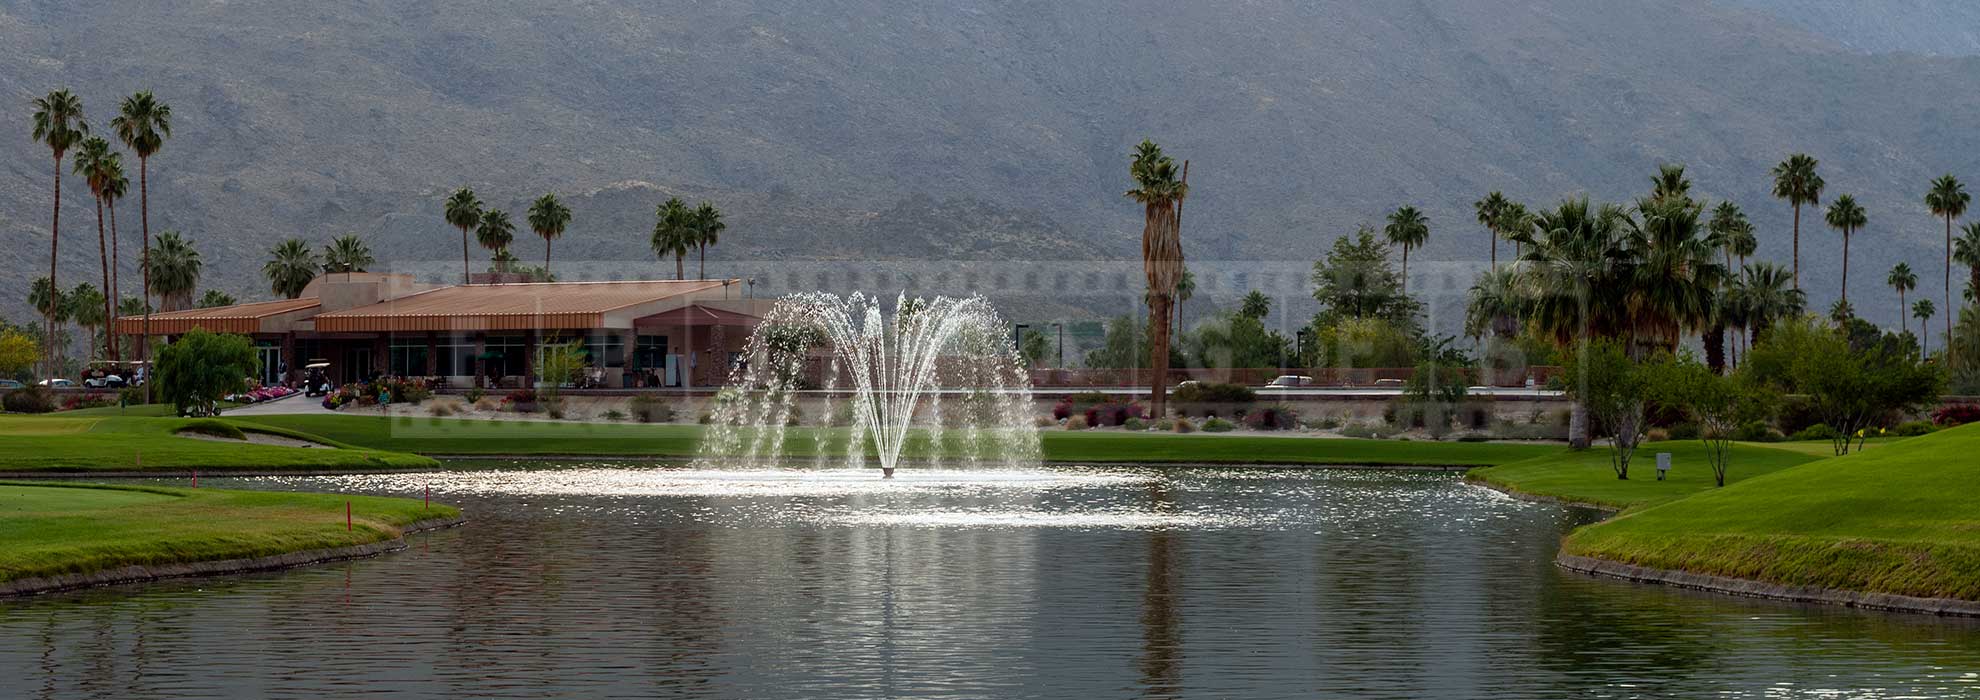 Fountain and water feature near the clubhouse at Indian Canyons golf course